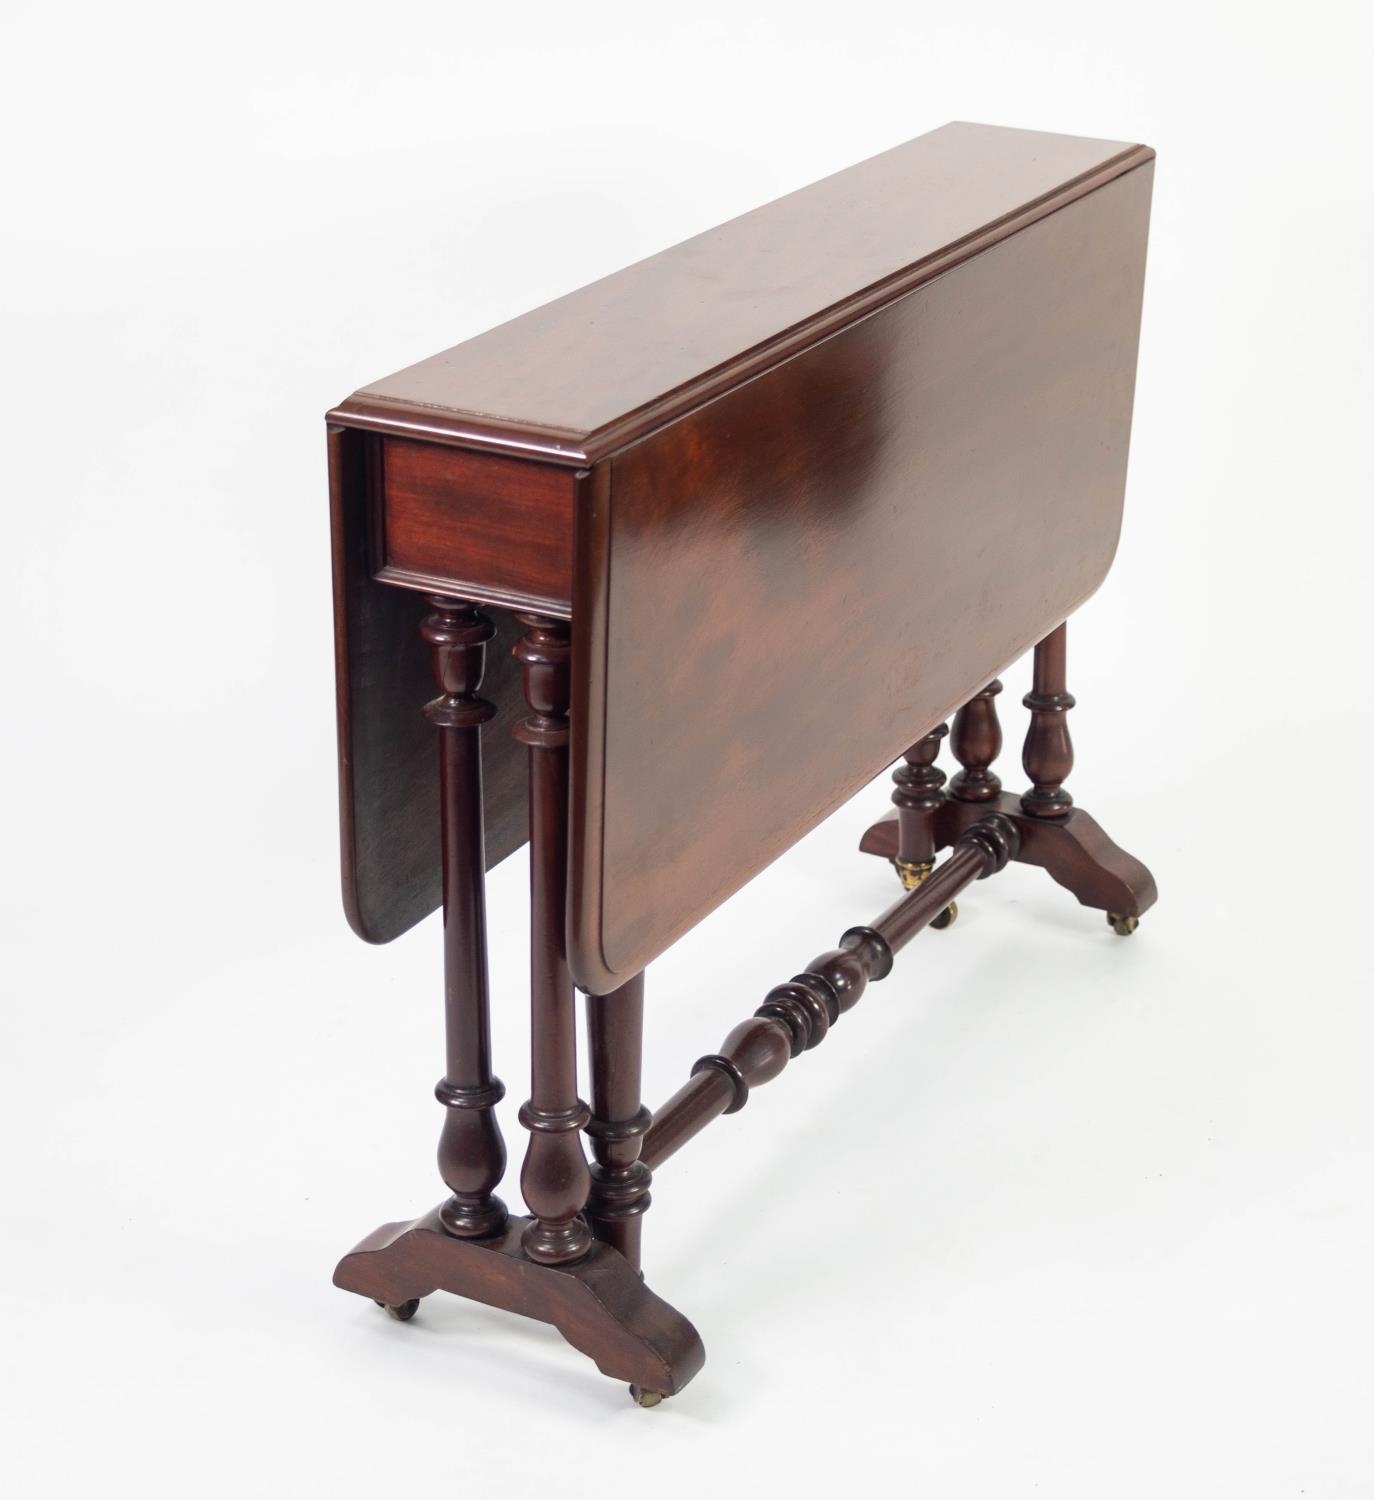 VICTORIAN MAHOGANY SUTHERLAND TABLE, with moulded, rounded oblong drop leaves and double turned